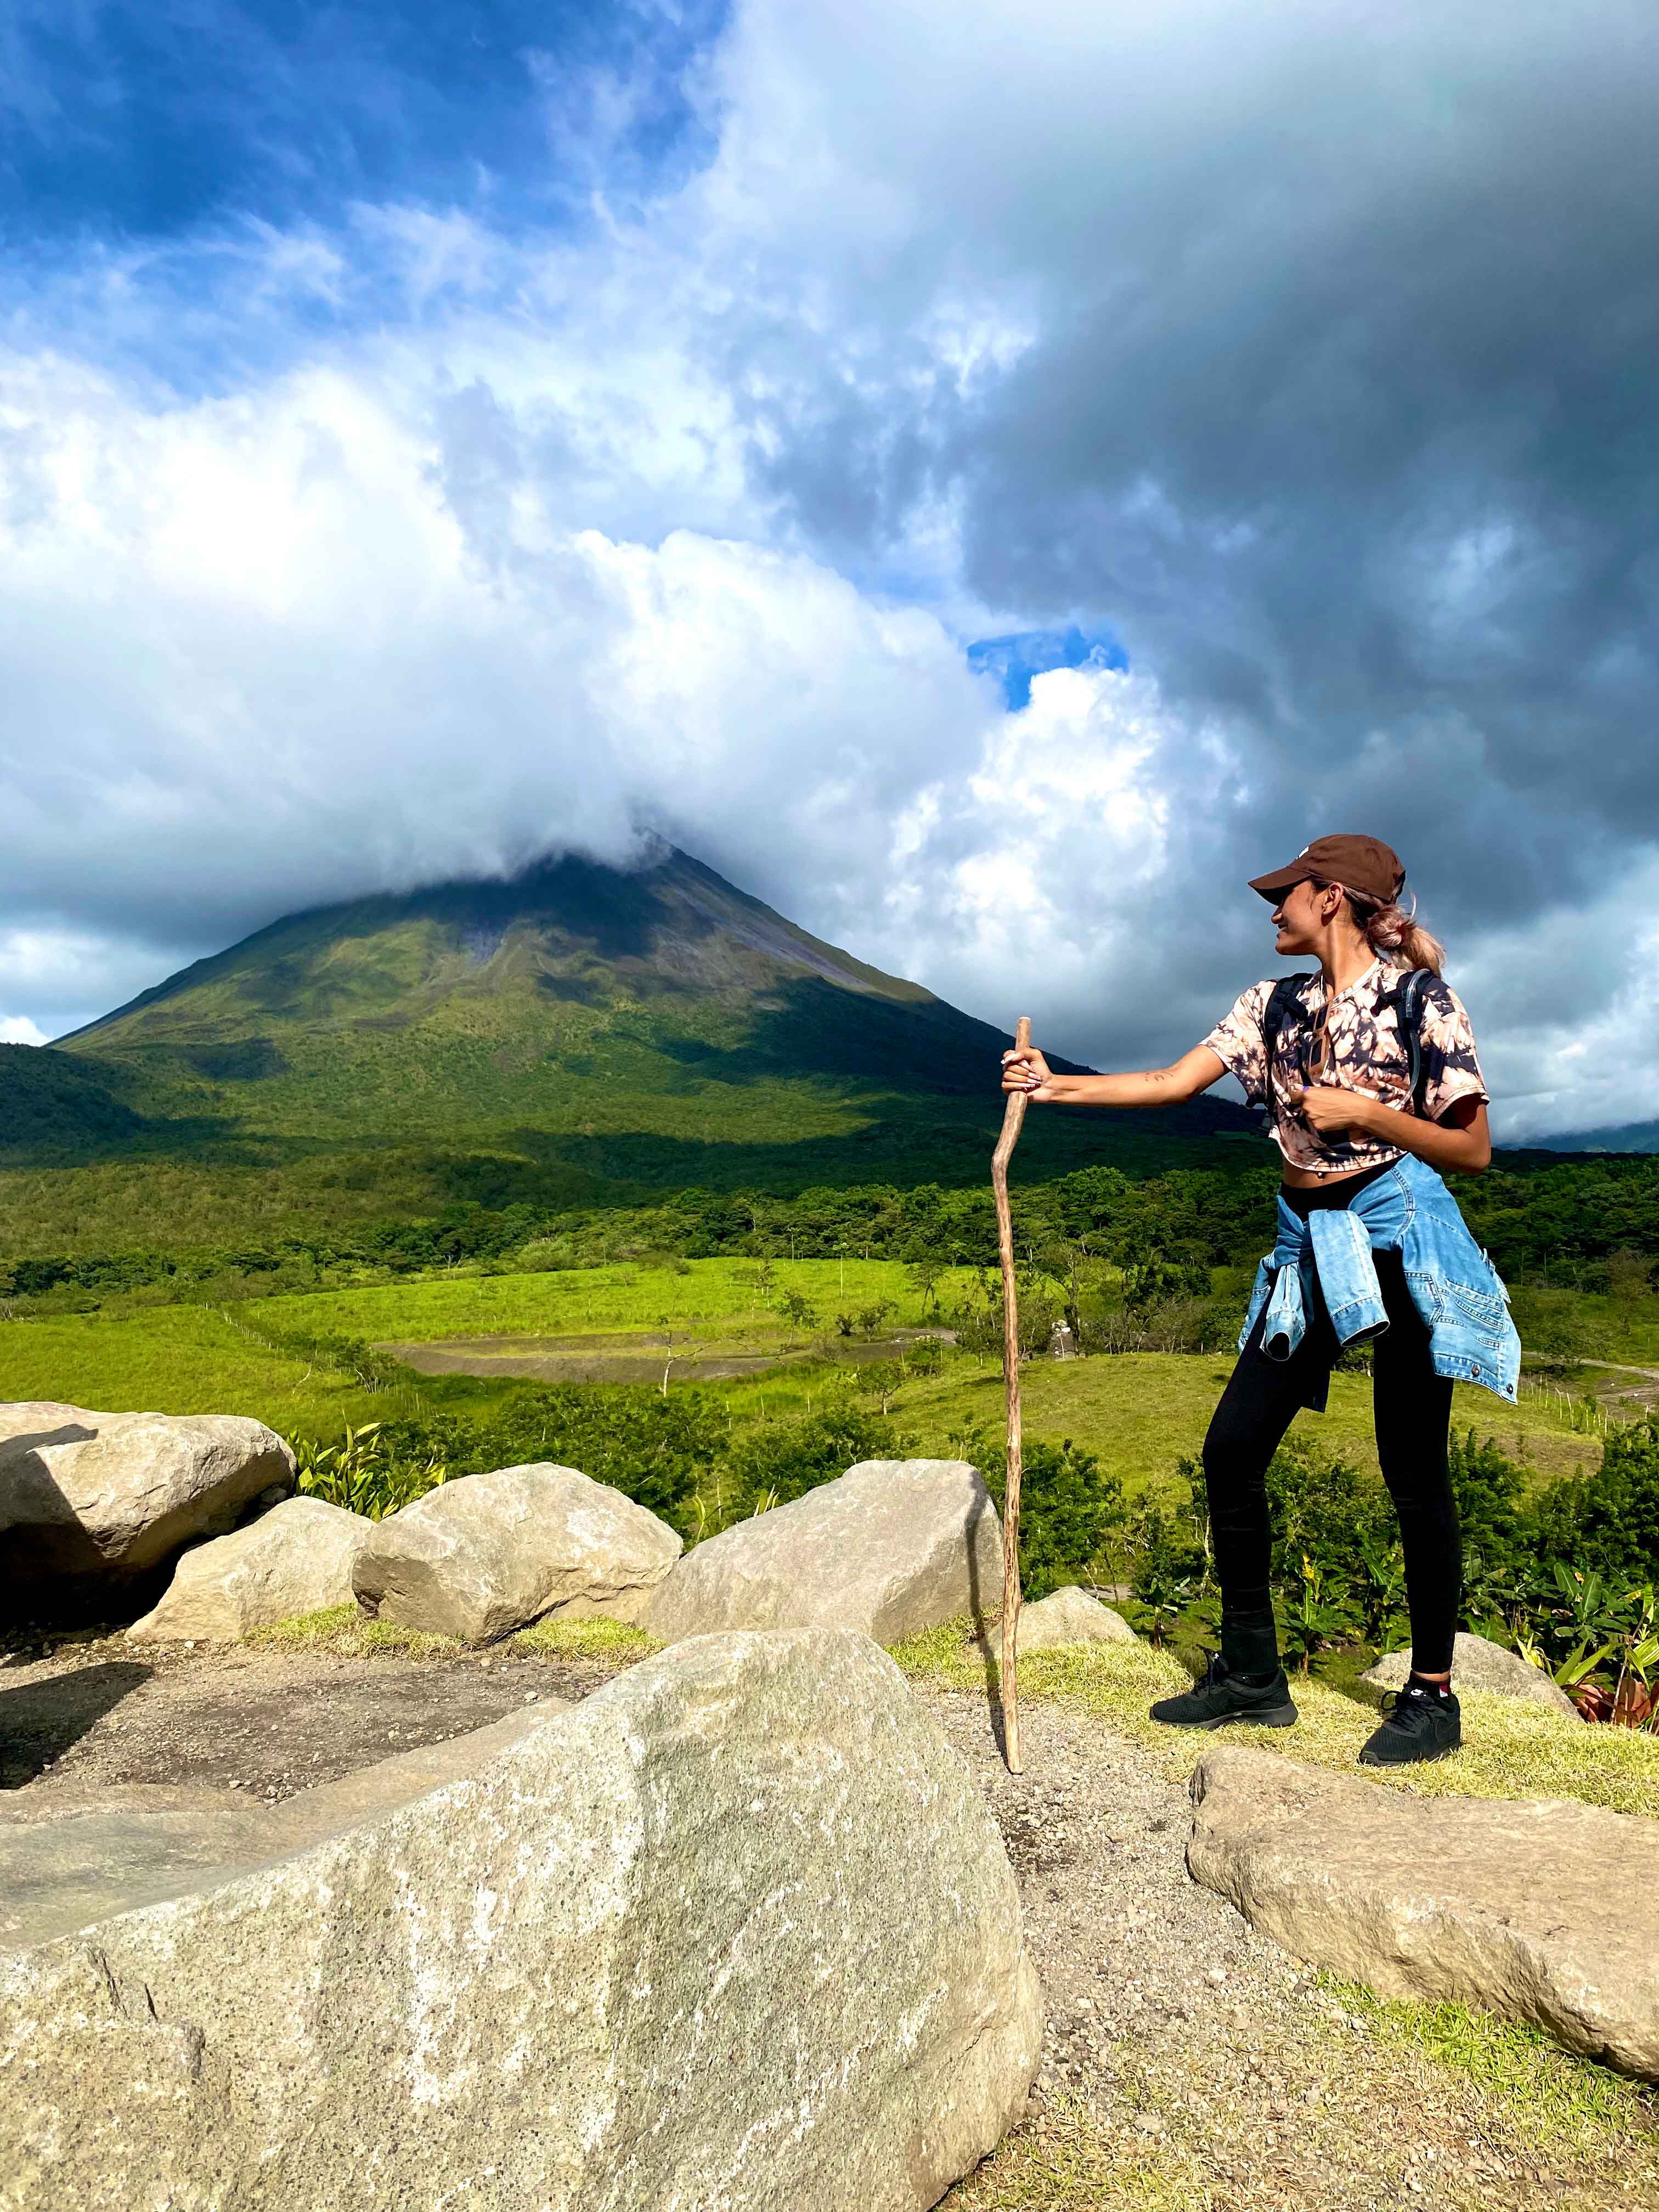 Student posing near mountains in Costa Rica